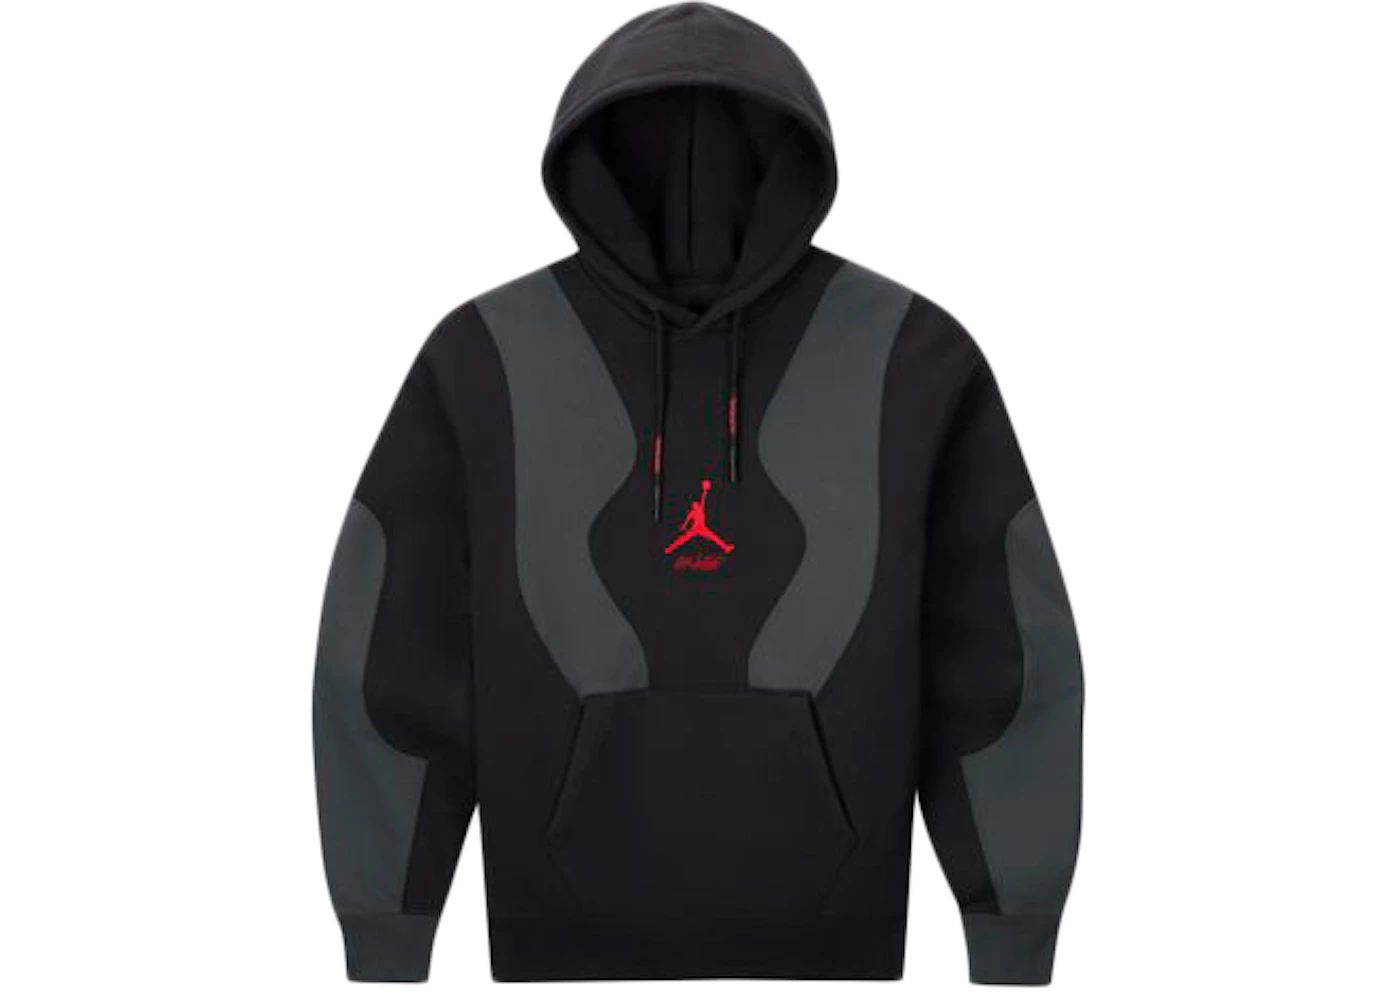 Off white jordan hoodie use of red button in lenovo thinkpad